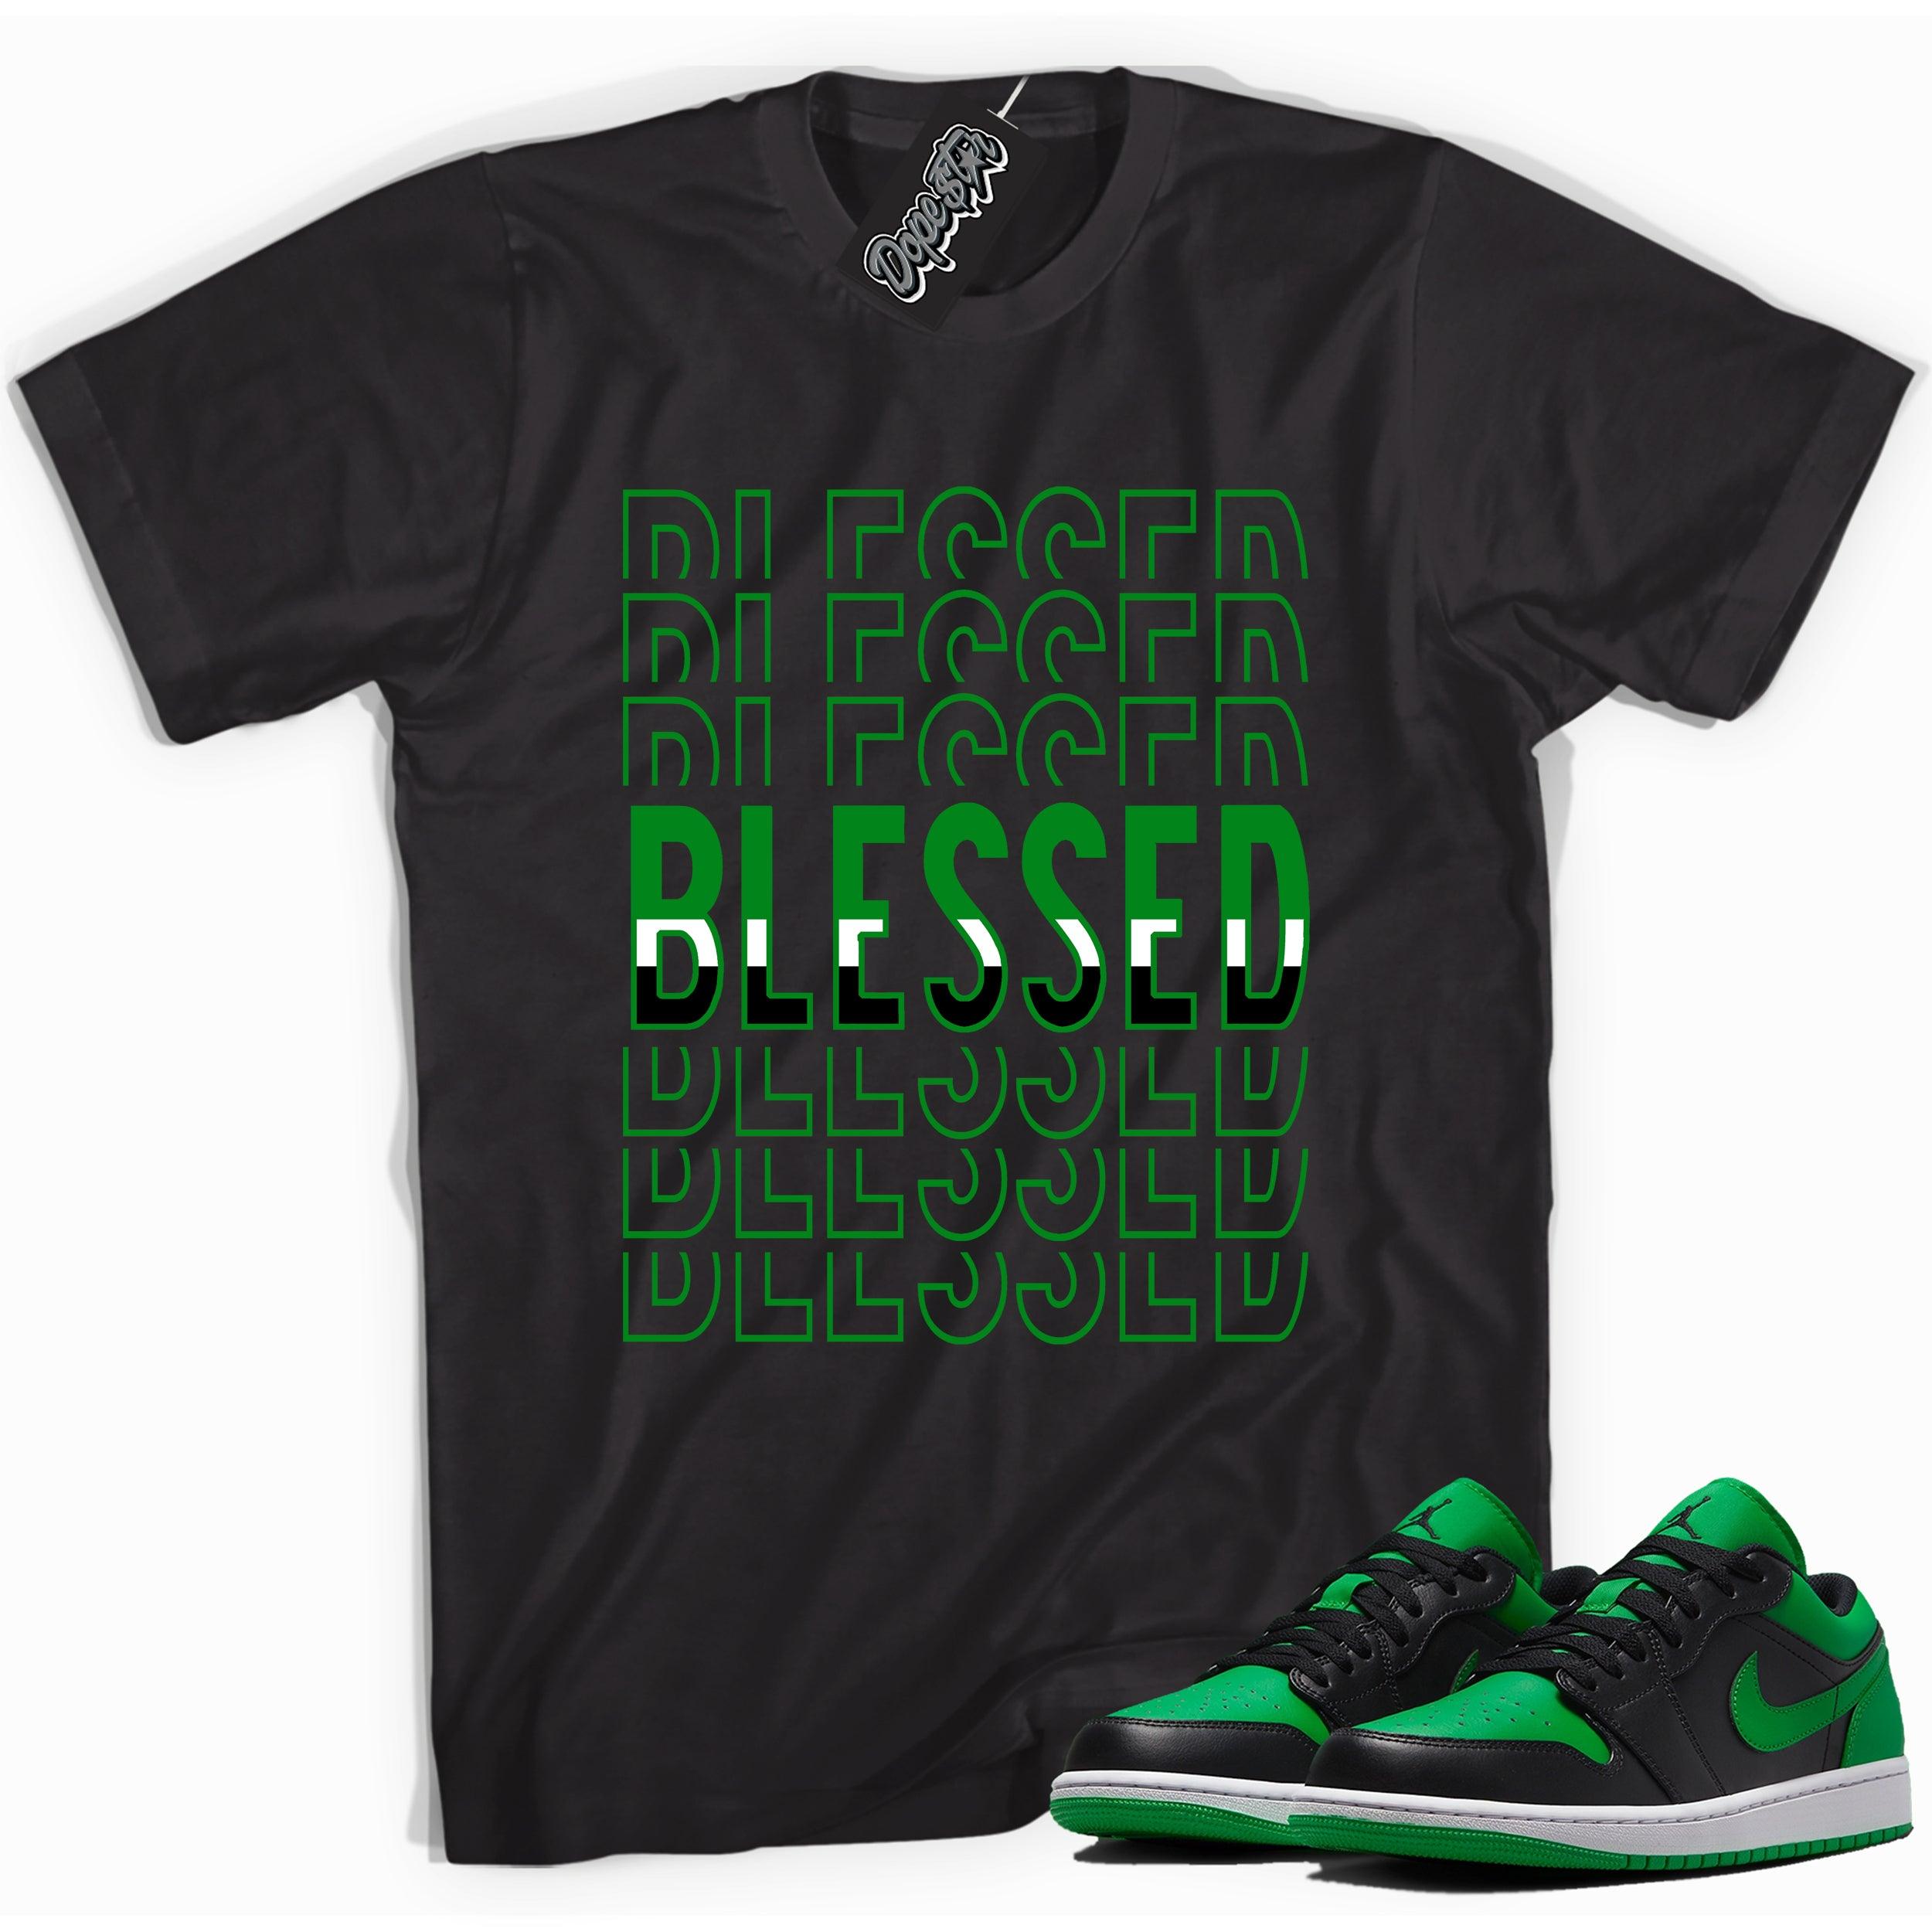 Cool black graphic tee with 'Blessed' print, that perfectly matches Air Jordan 1 Low Lucky Green sneakers